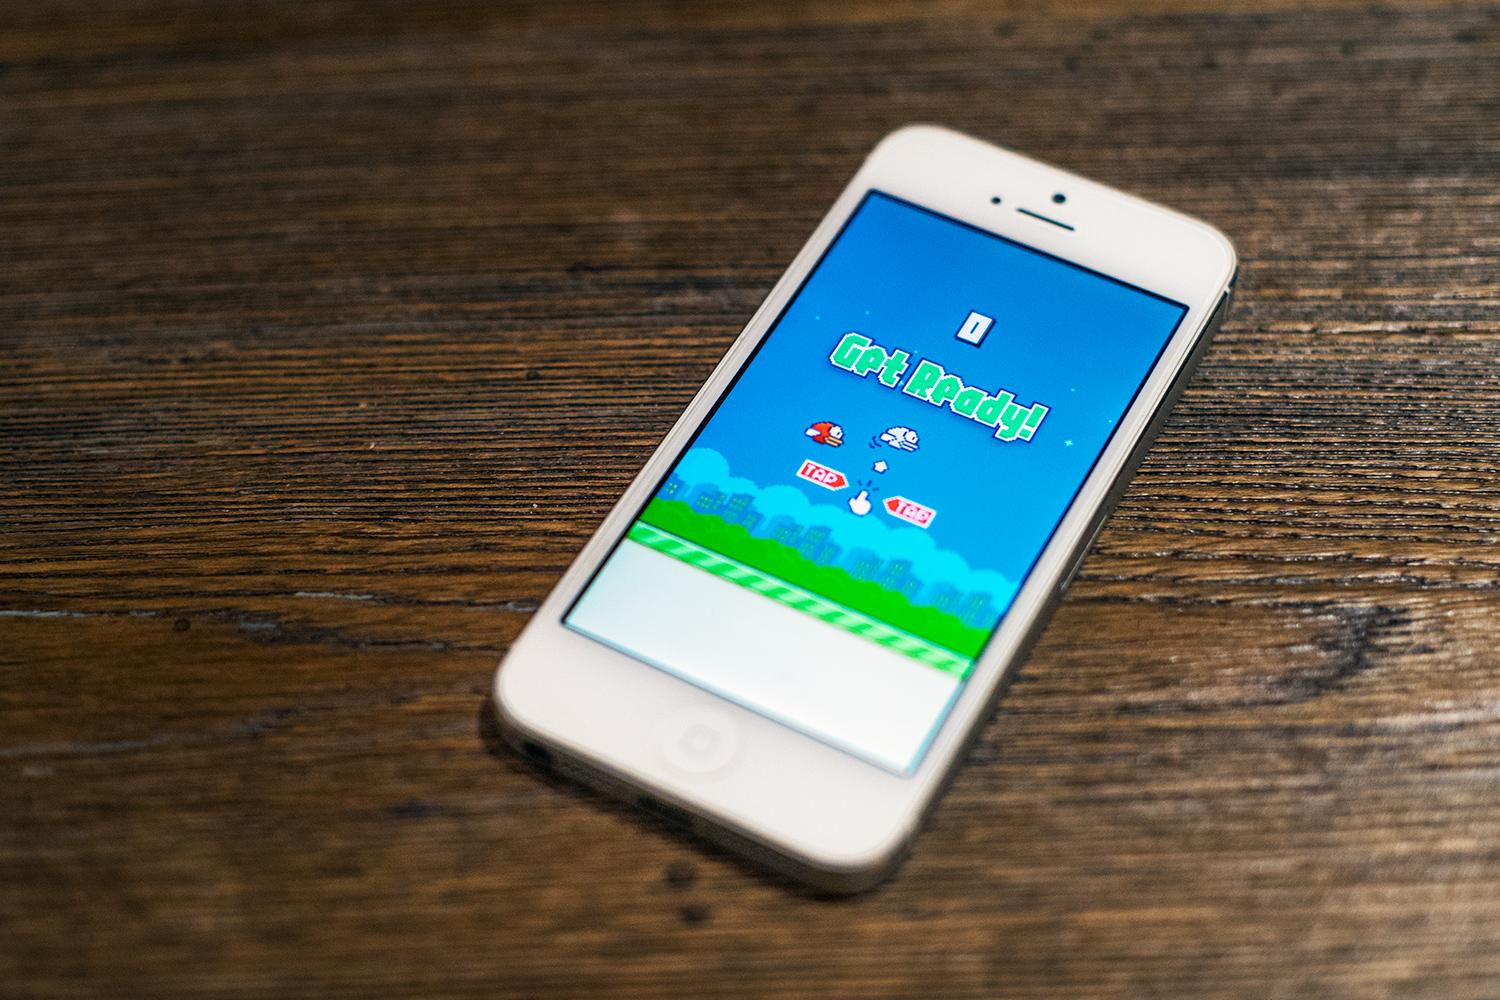 Flappy Bird Is Gone From The App Store